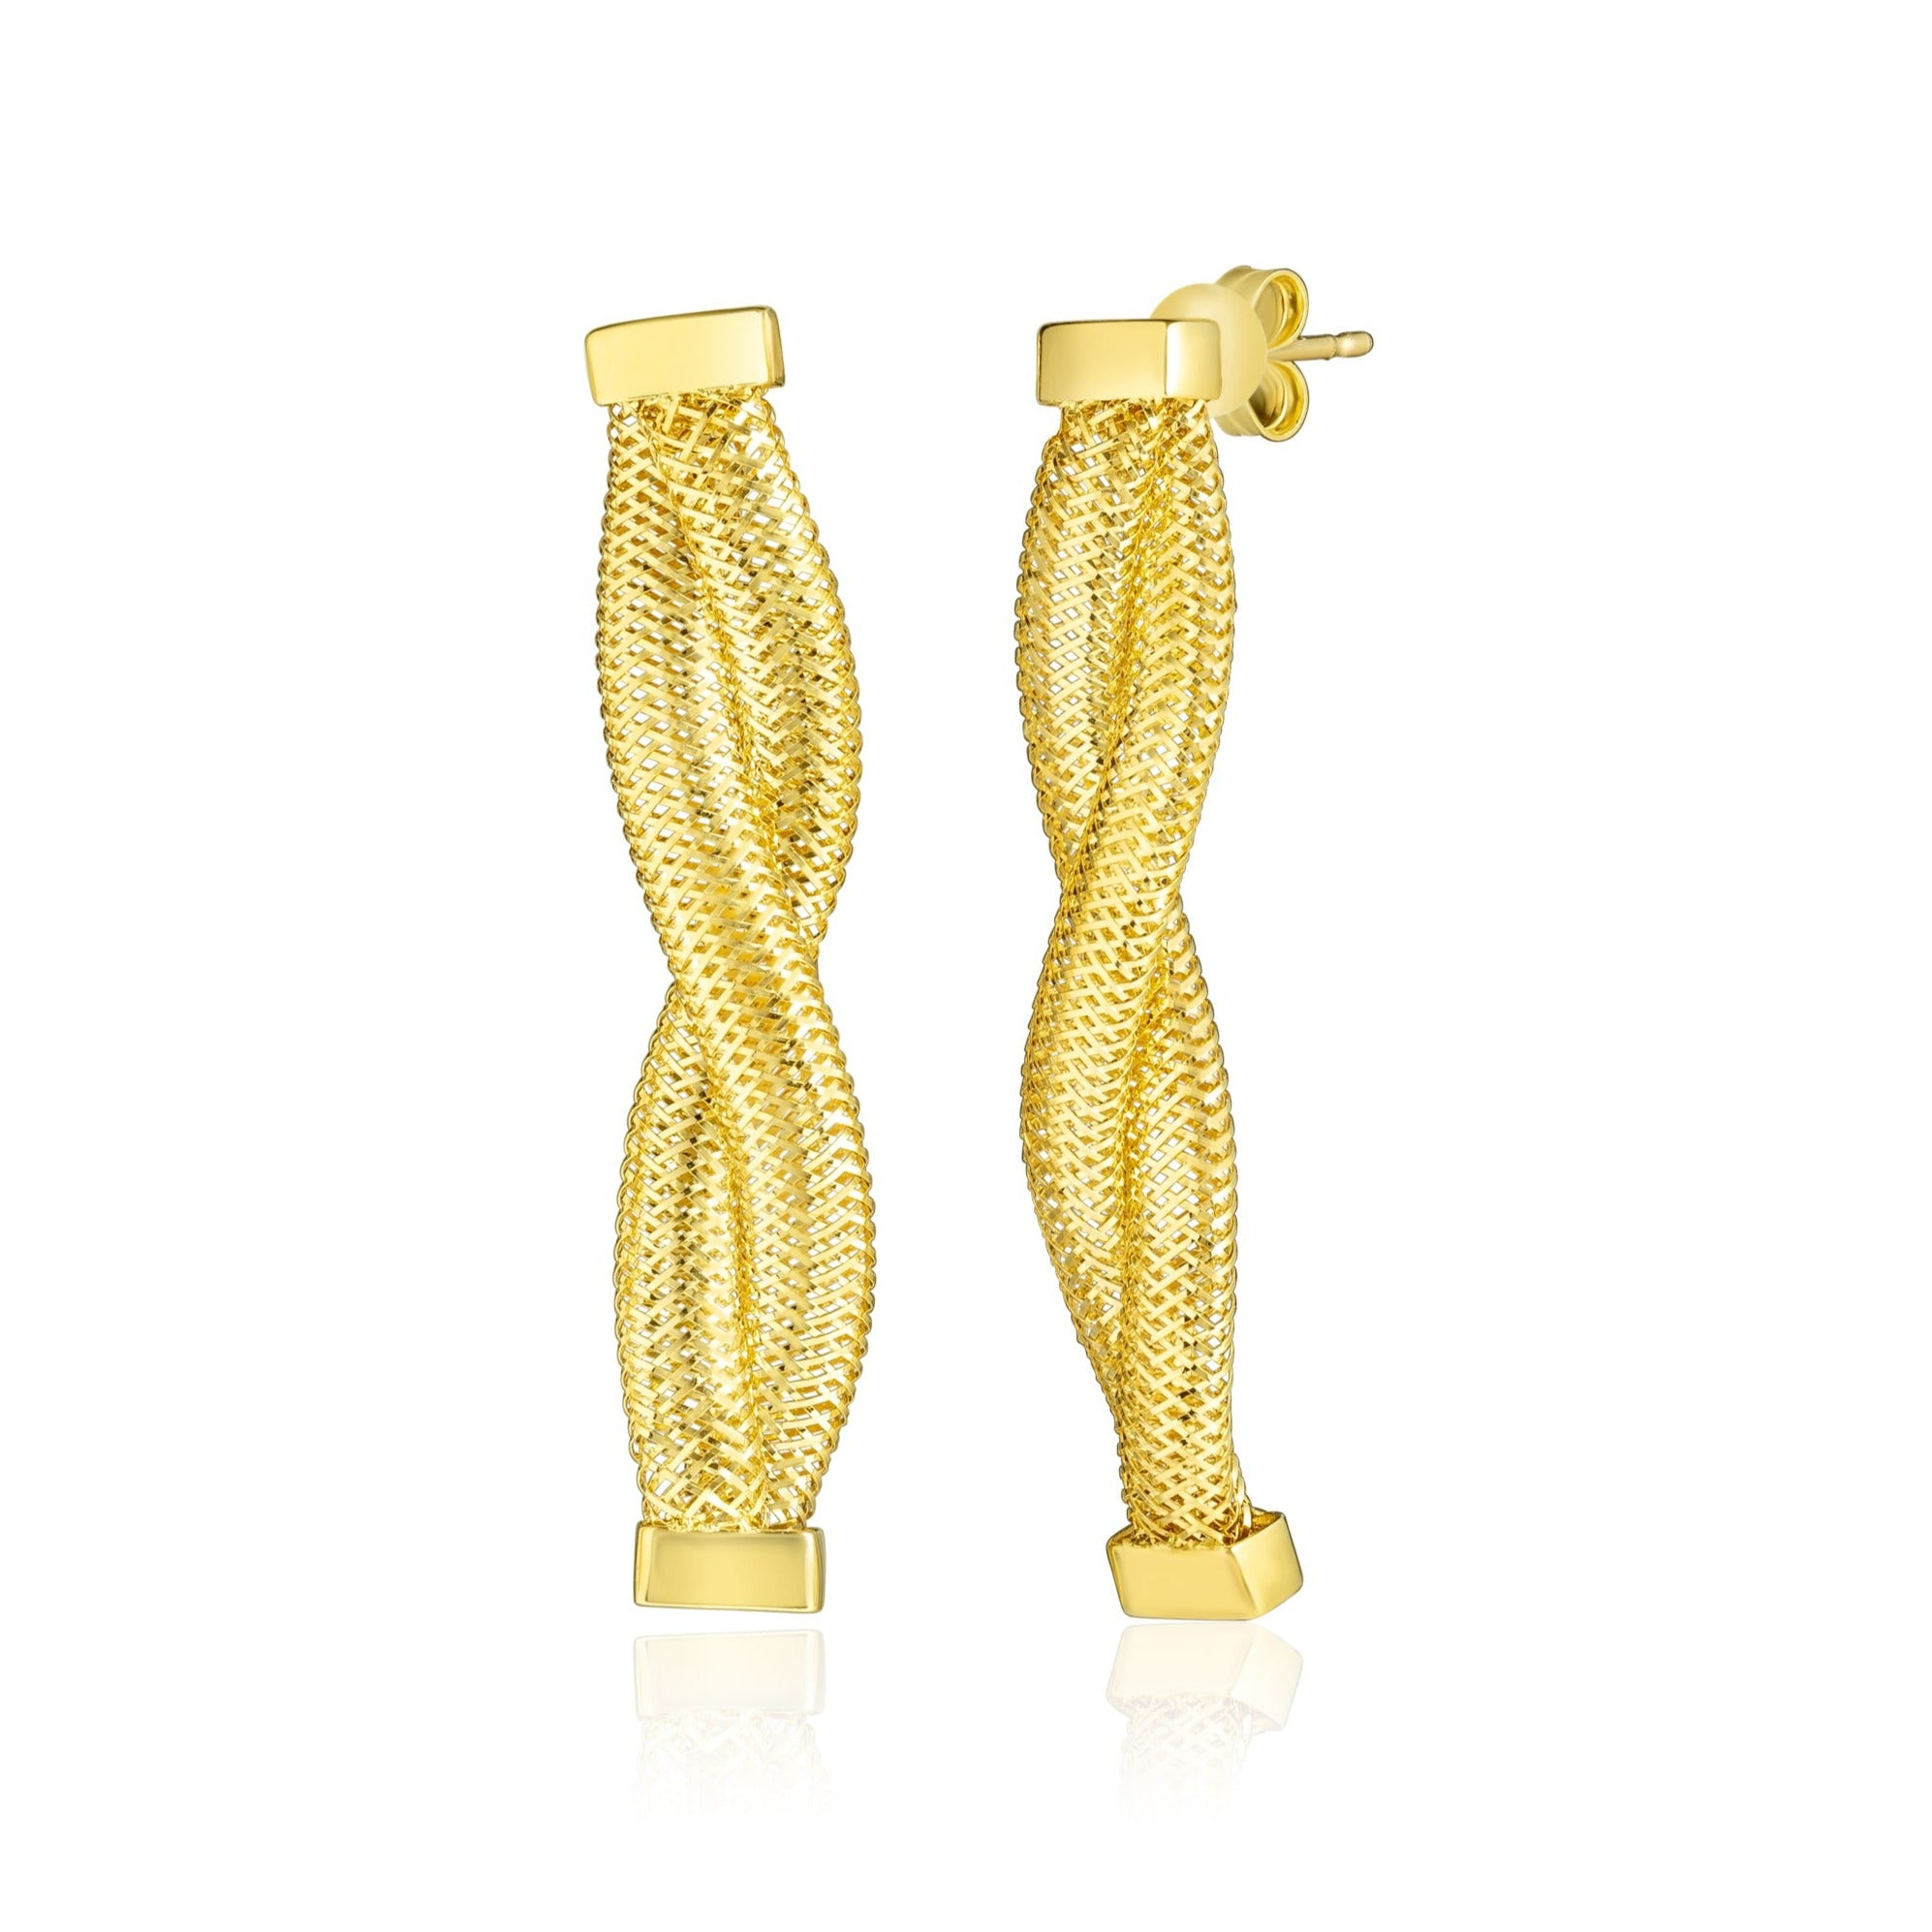 18K Pure Gold Twisted Stud Earring Set